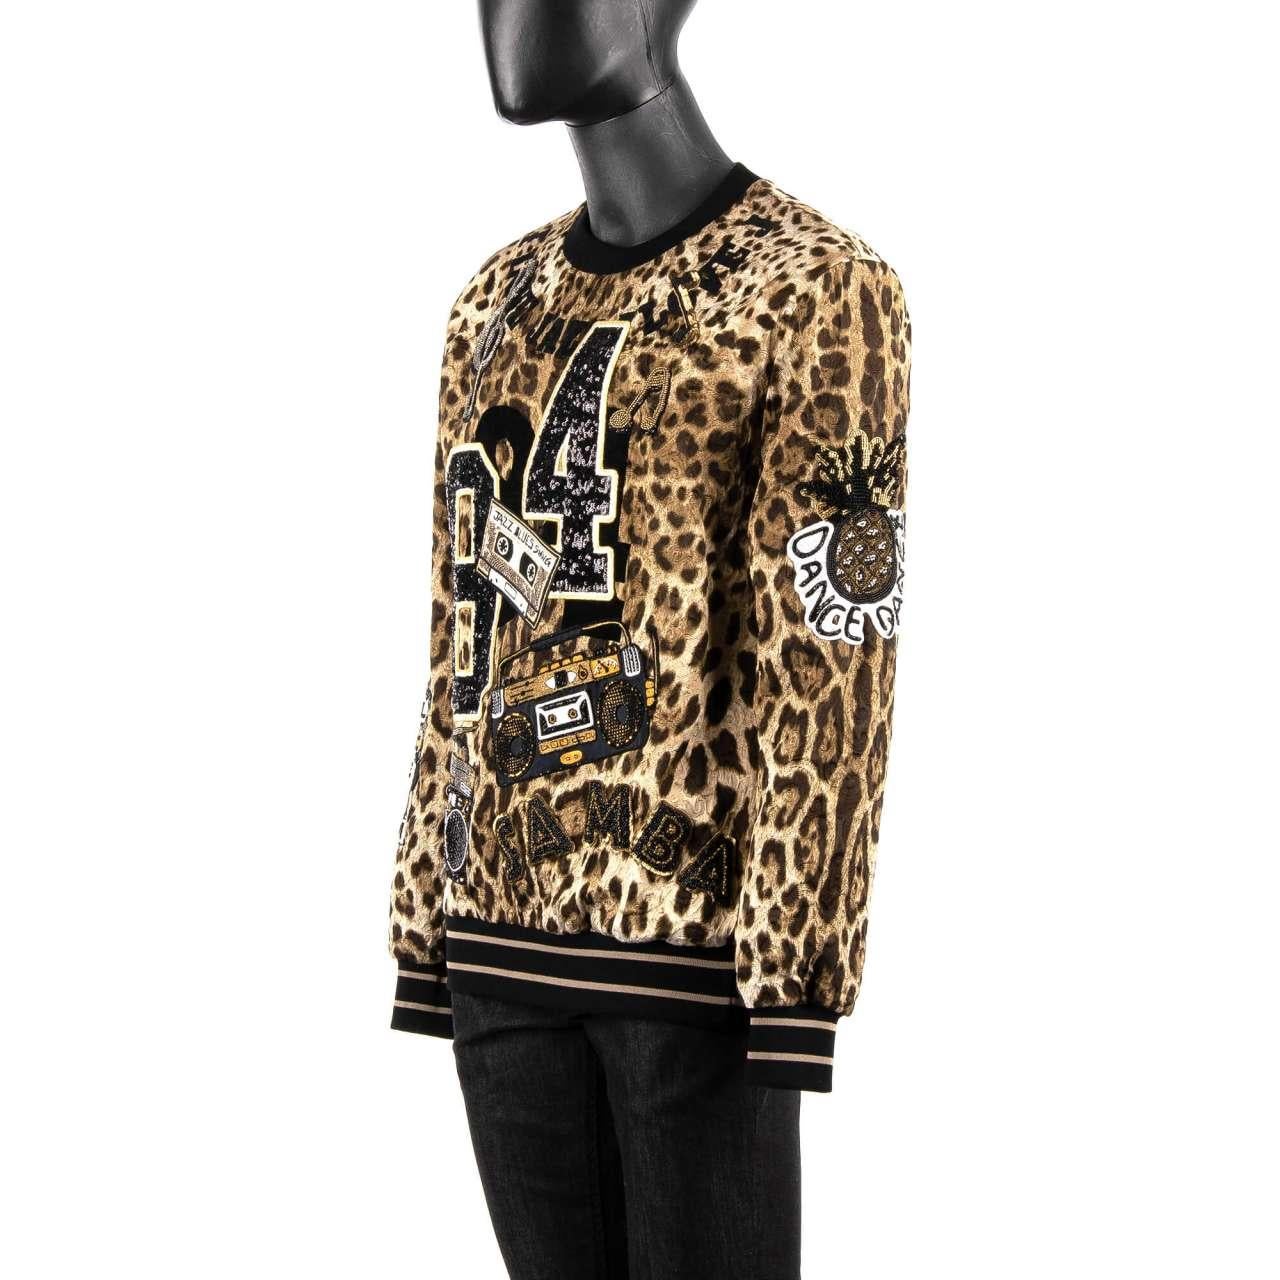 D&G Leopard Printed Sweater with Jazz Samba Music Embroidery Black Brown 48 In Excellent Condition For Sale In Erkrath, DE